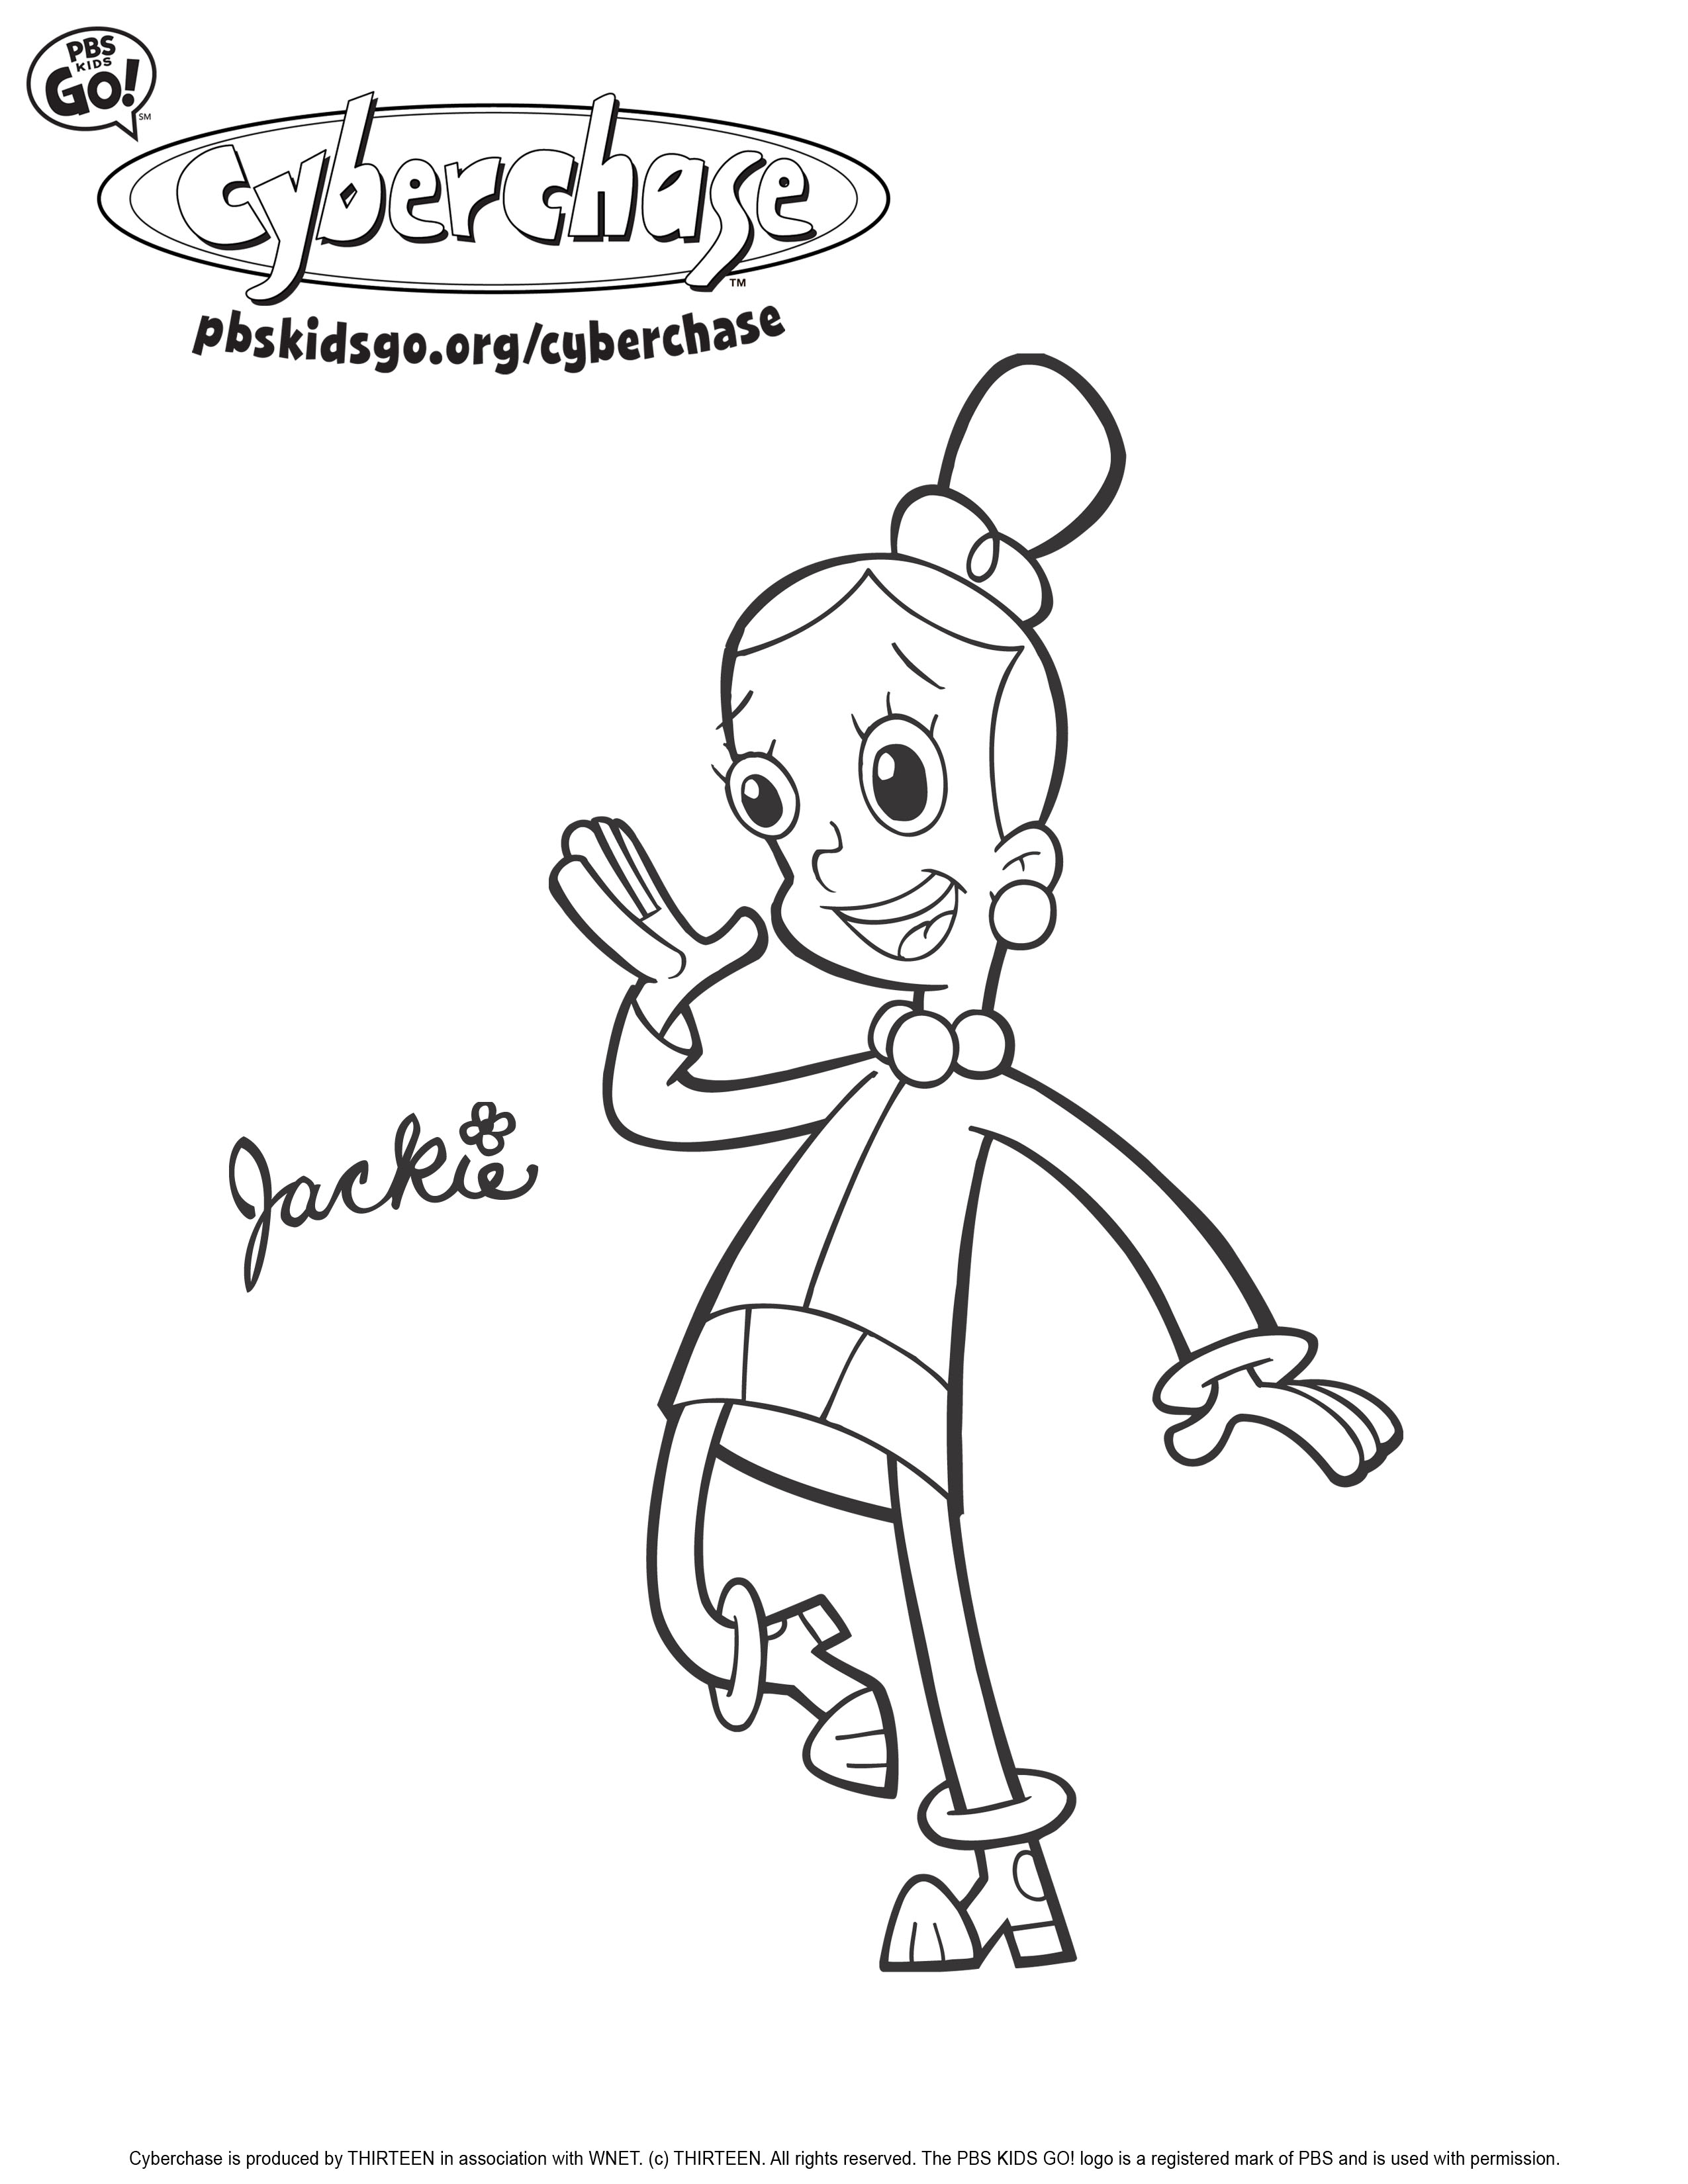 Sid the science kid coloring pages to download and print for free